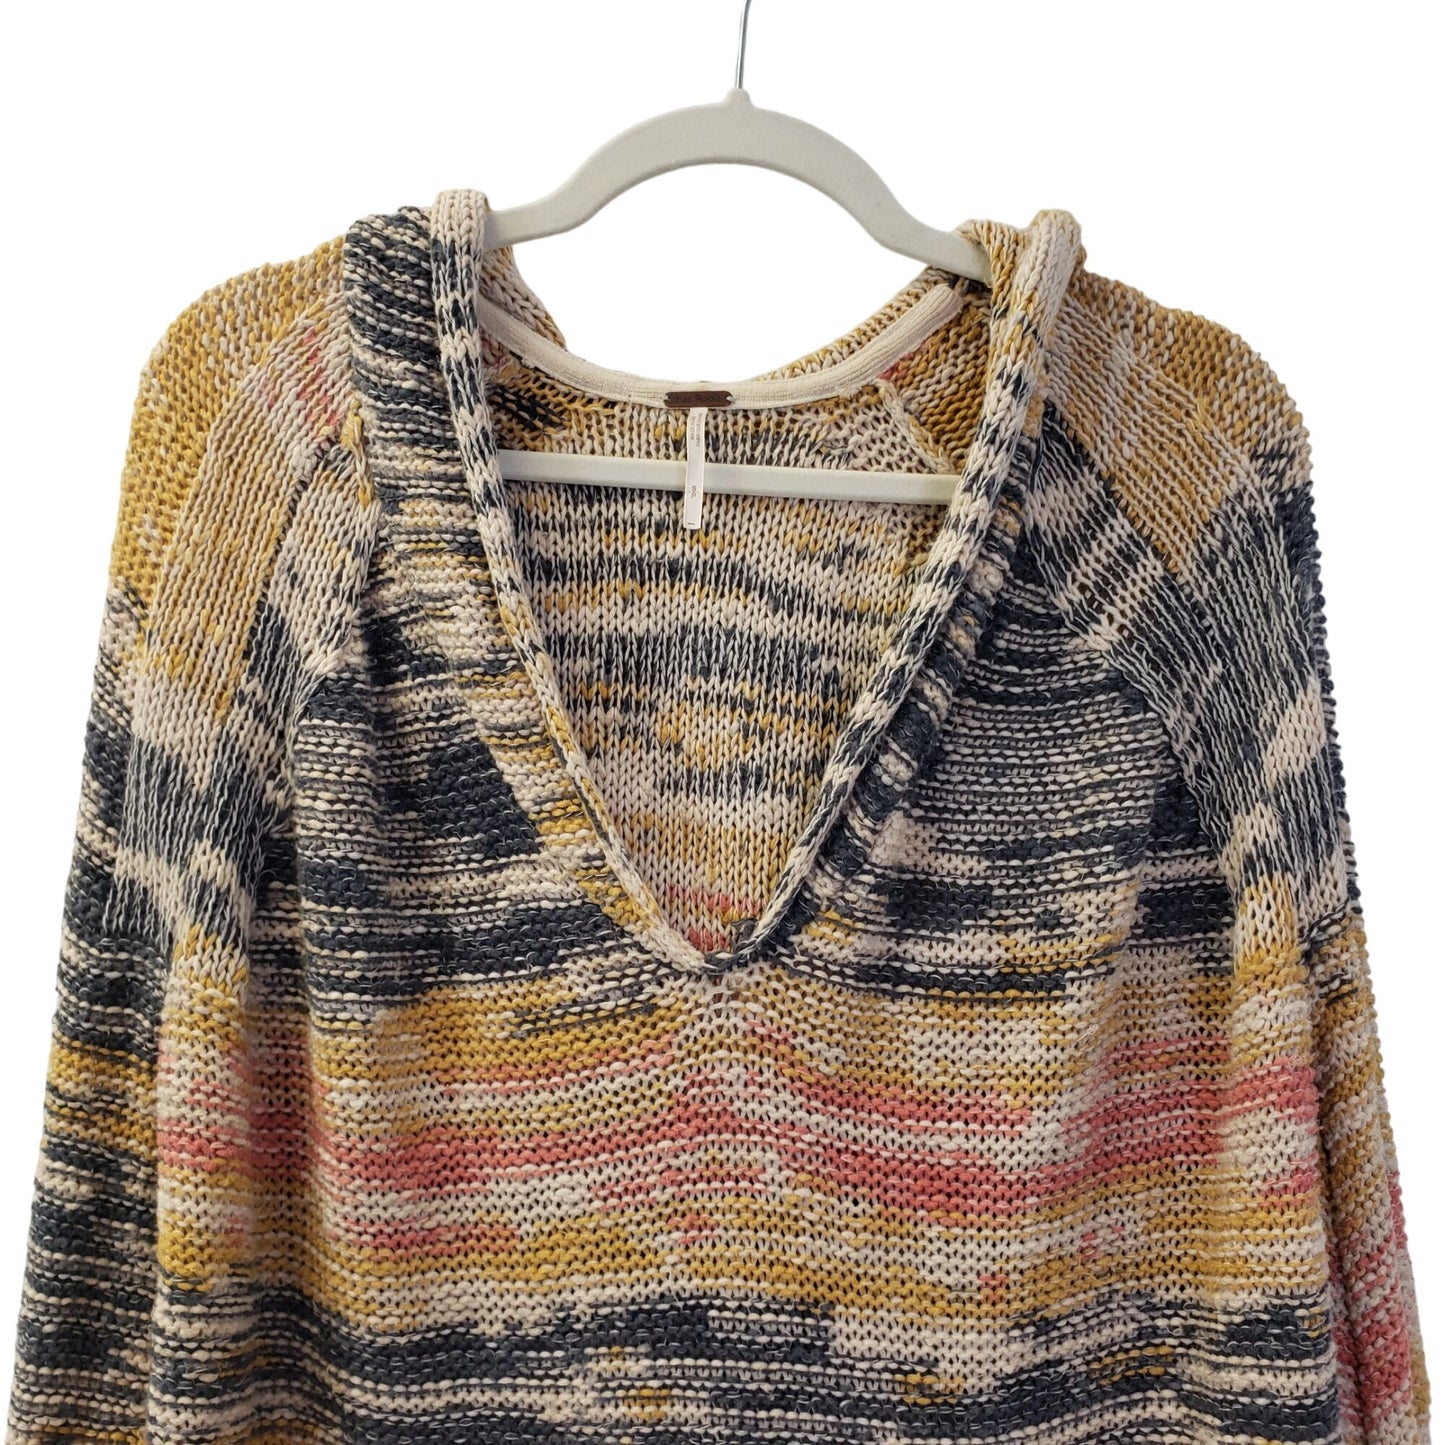 Free People Snow Cone Printed Oversized Linen Blend Hooded Sweater Size S/M